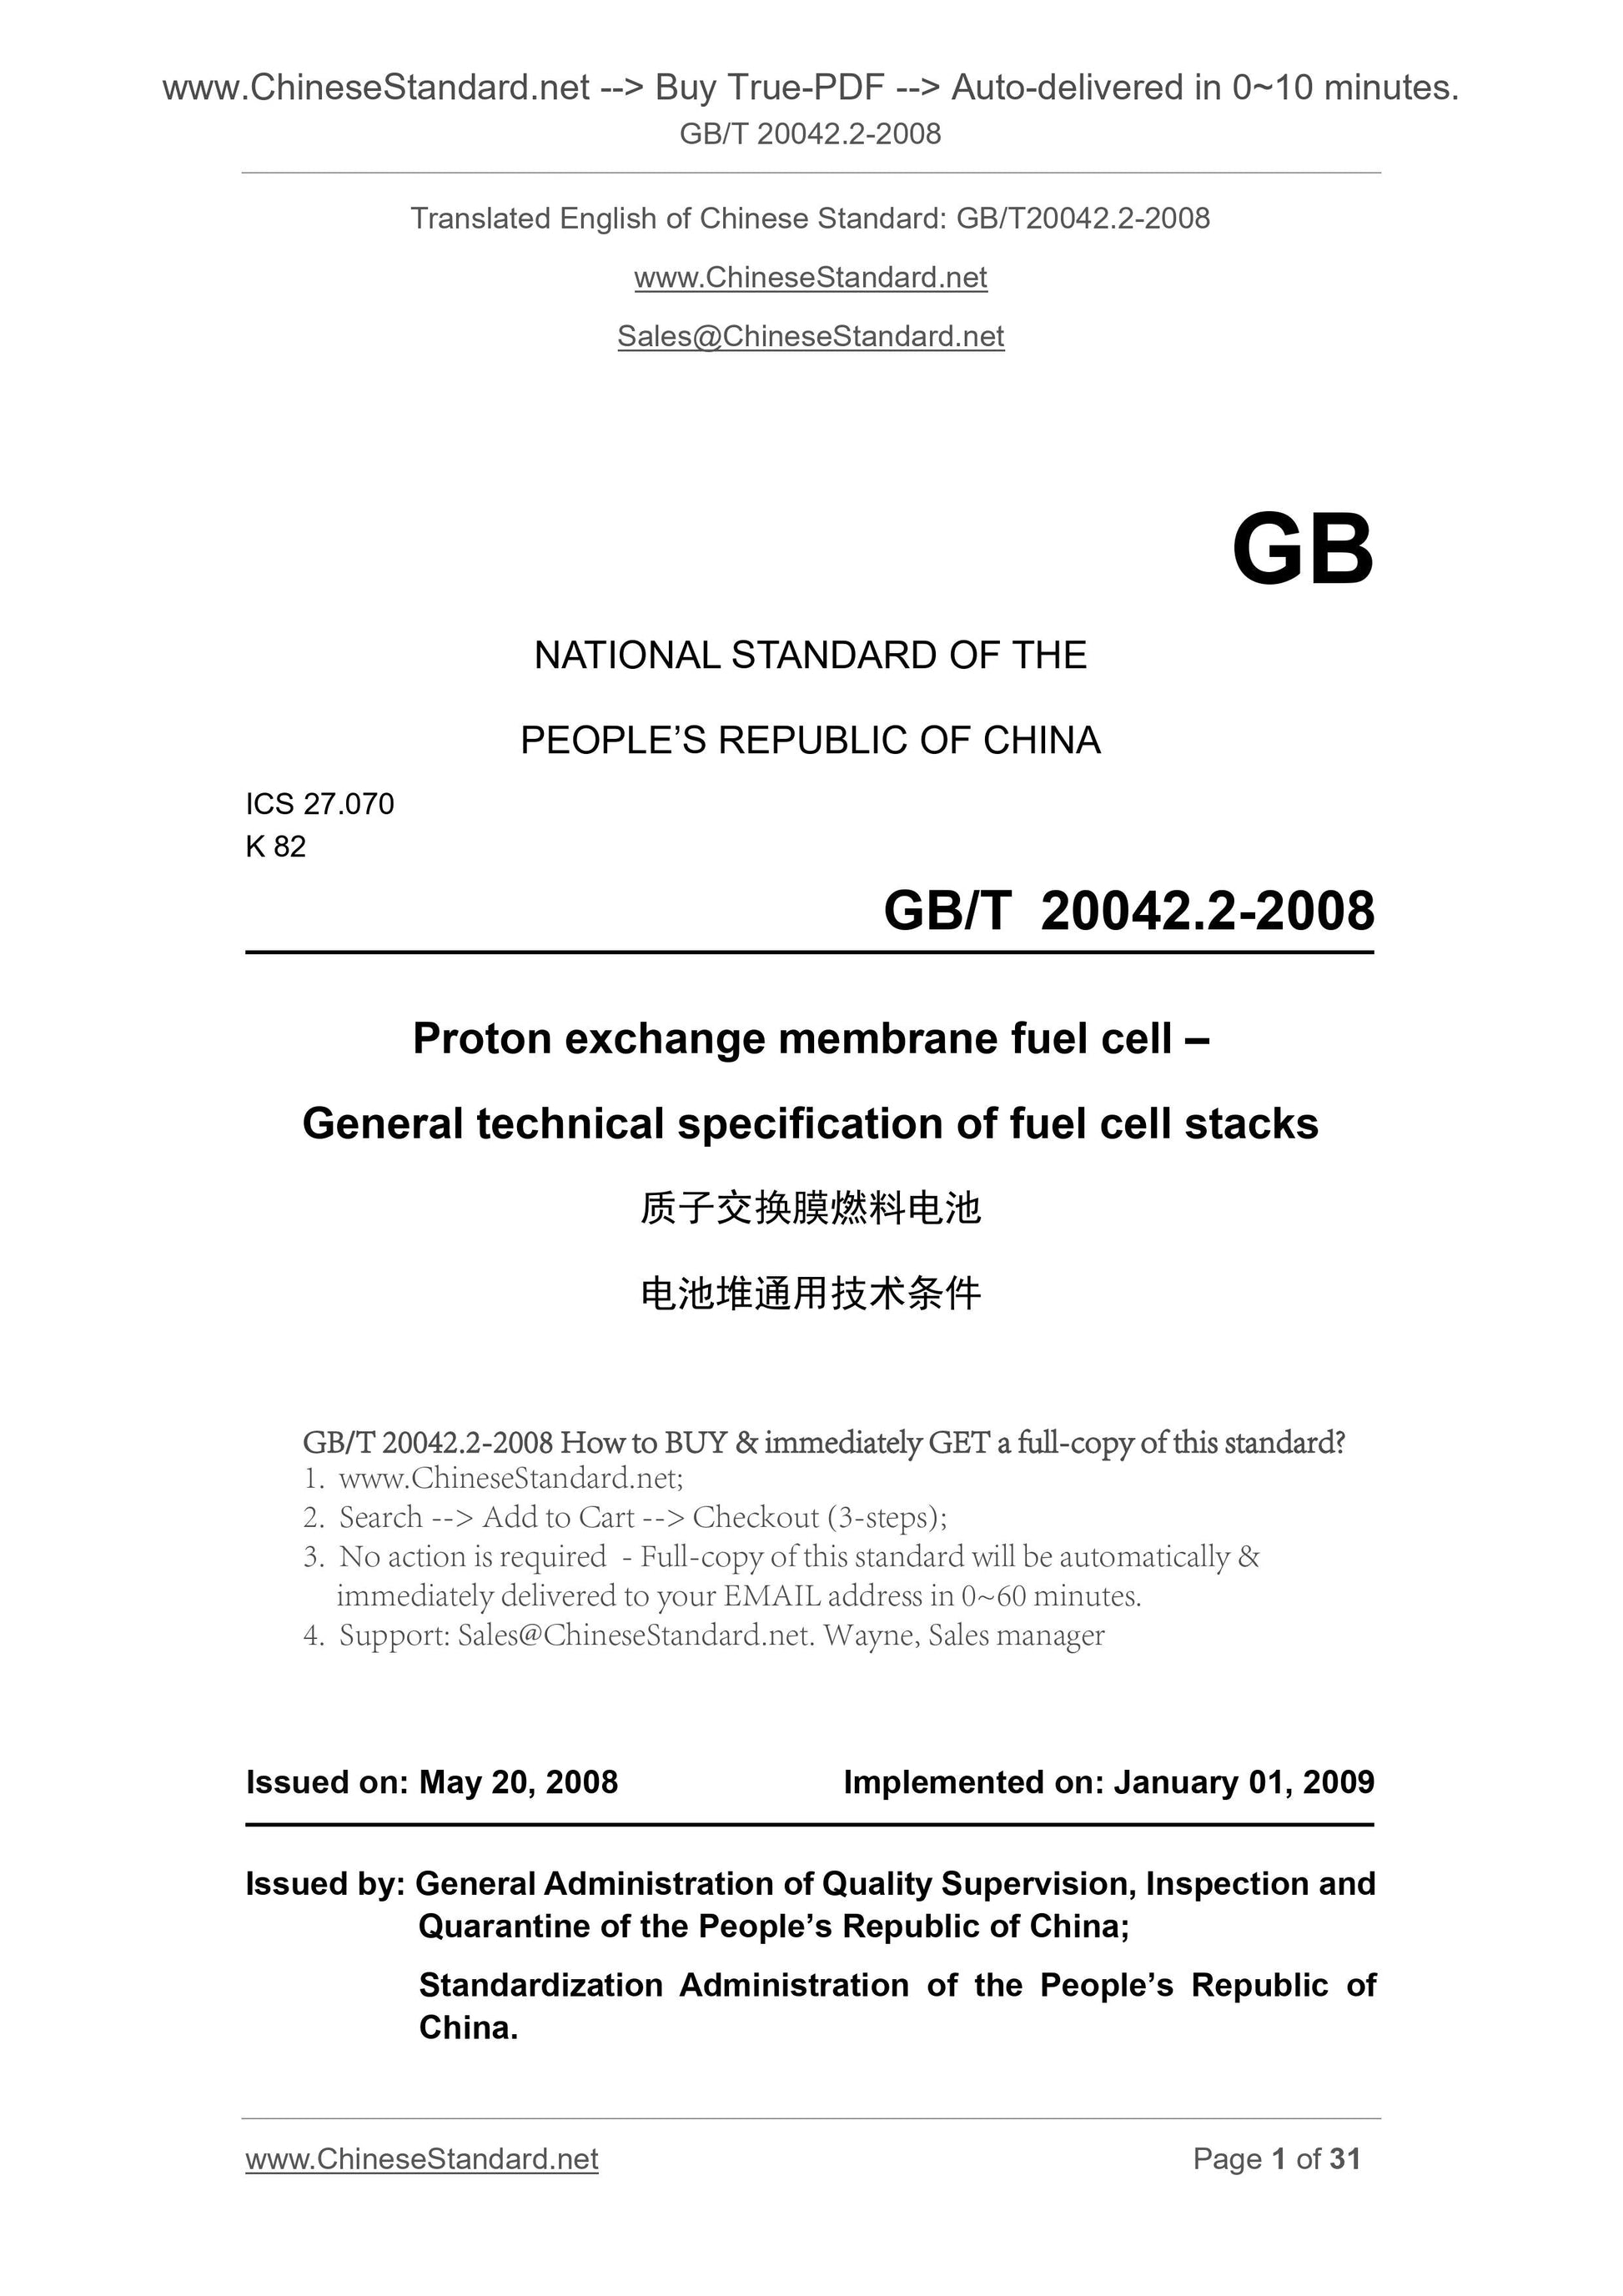 GB/T 20042.2-2008 Page 1